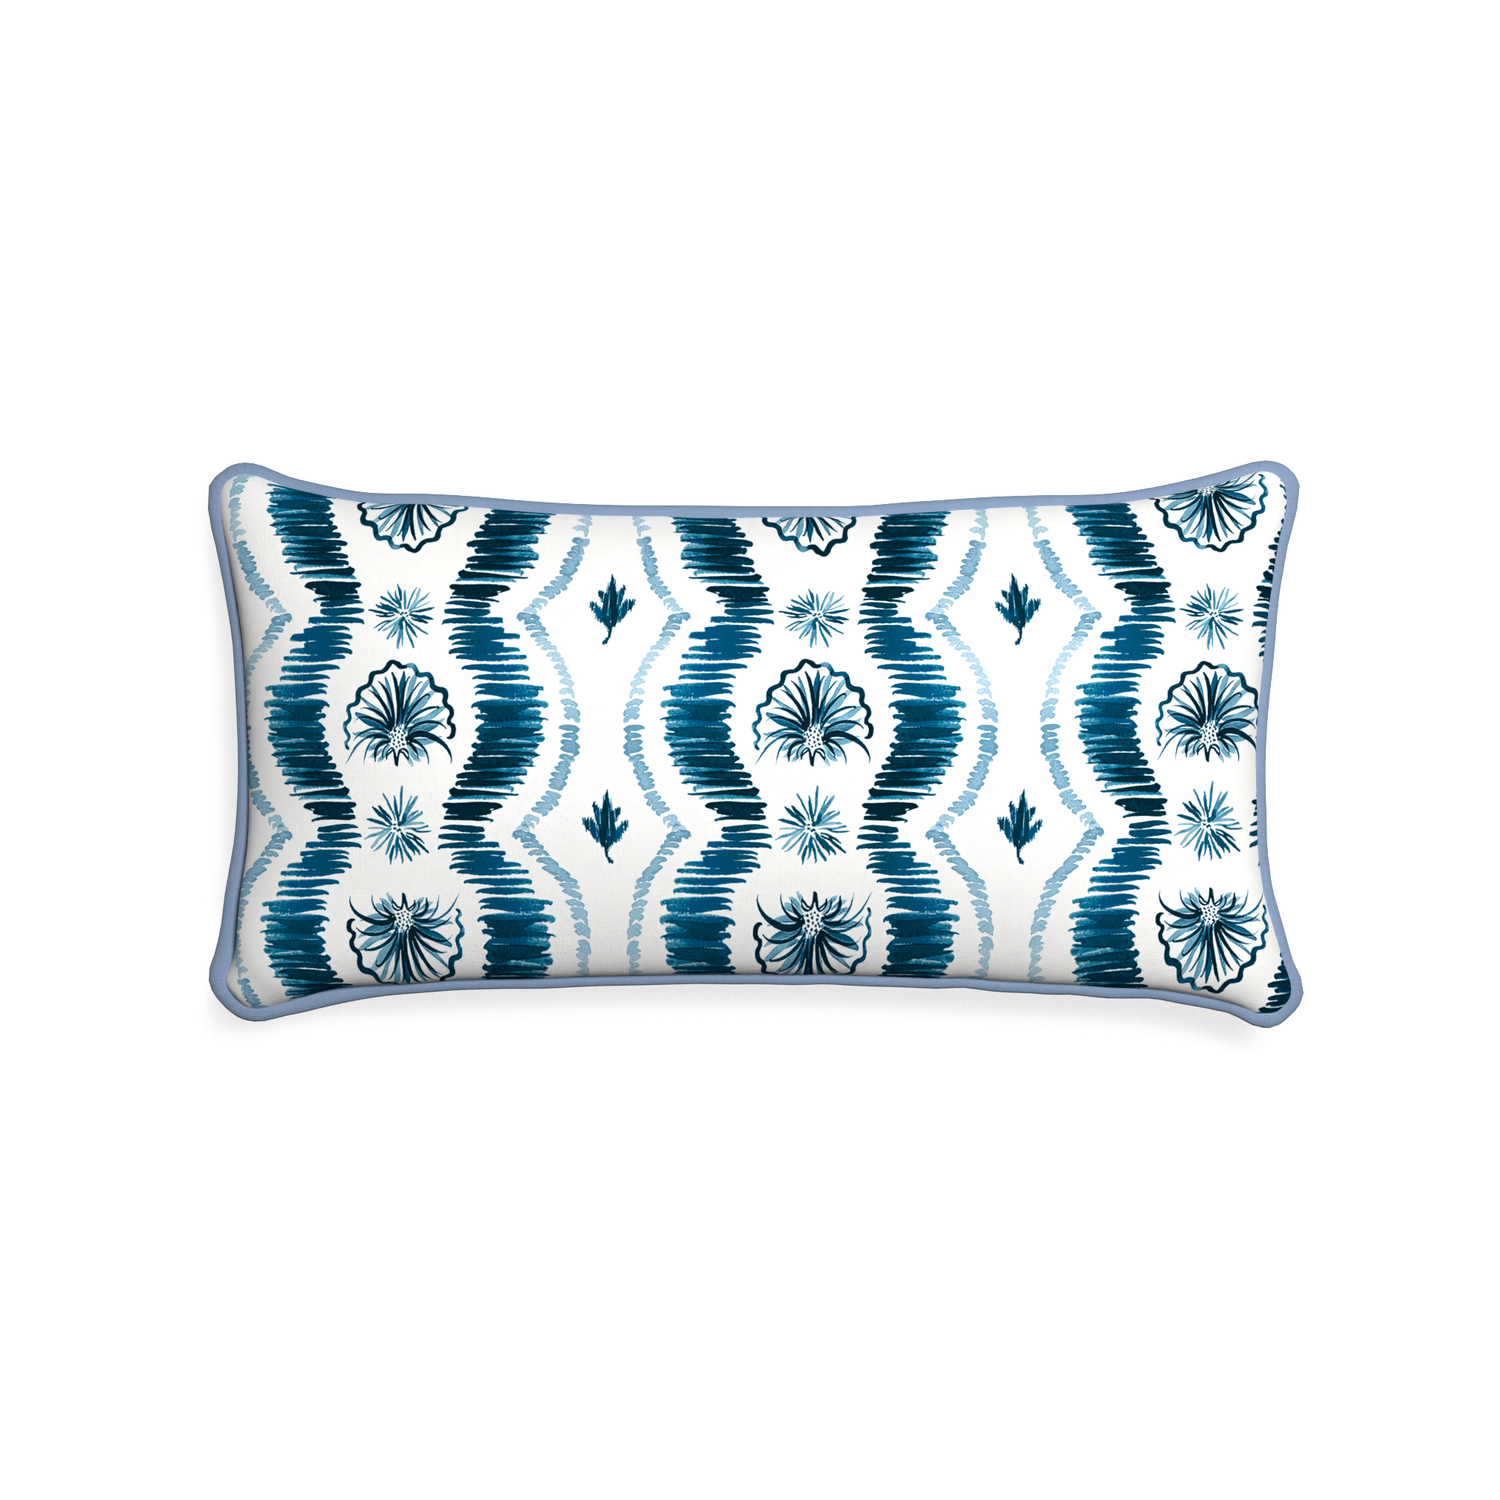 Midi-lumbar alice custom blue ikatpillow with sky piping on white background